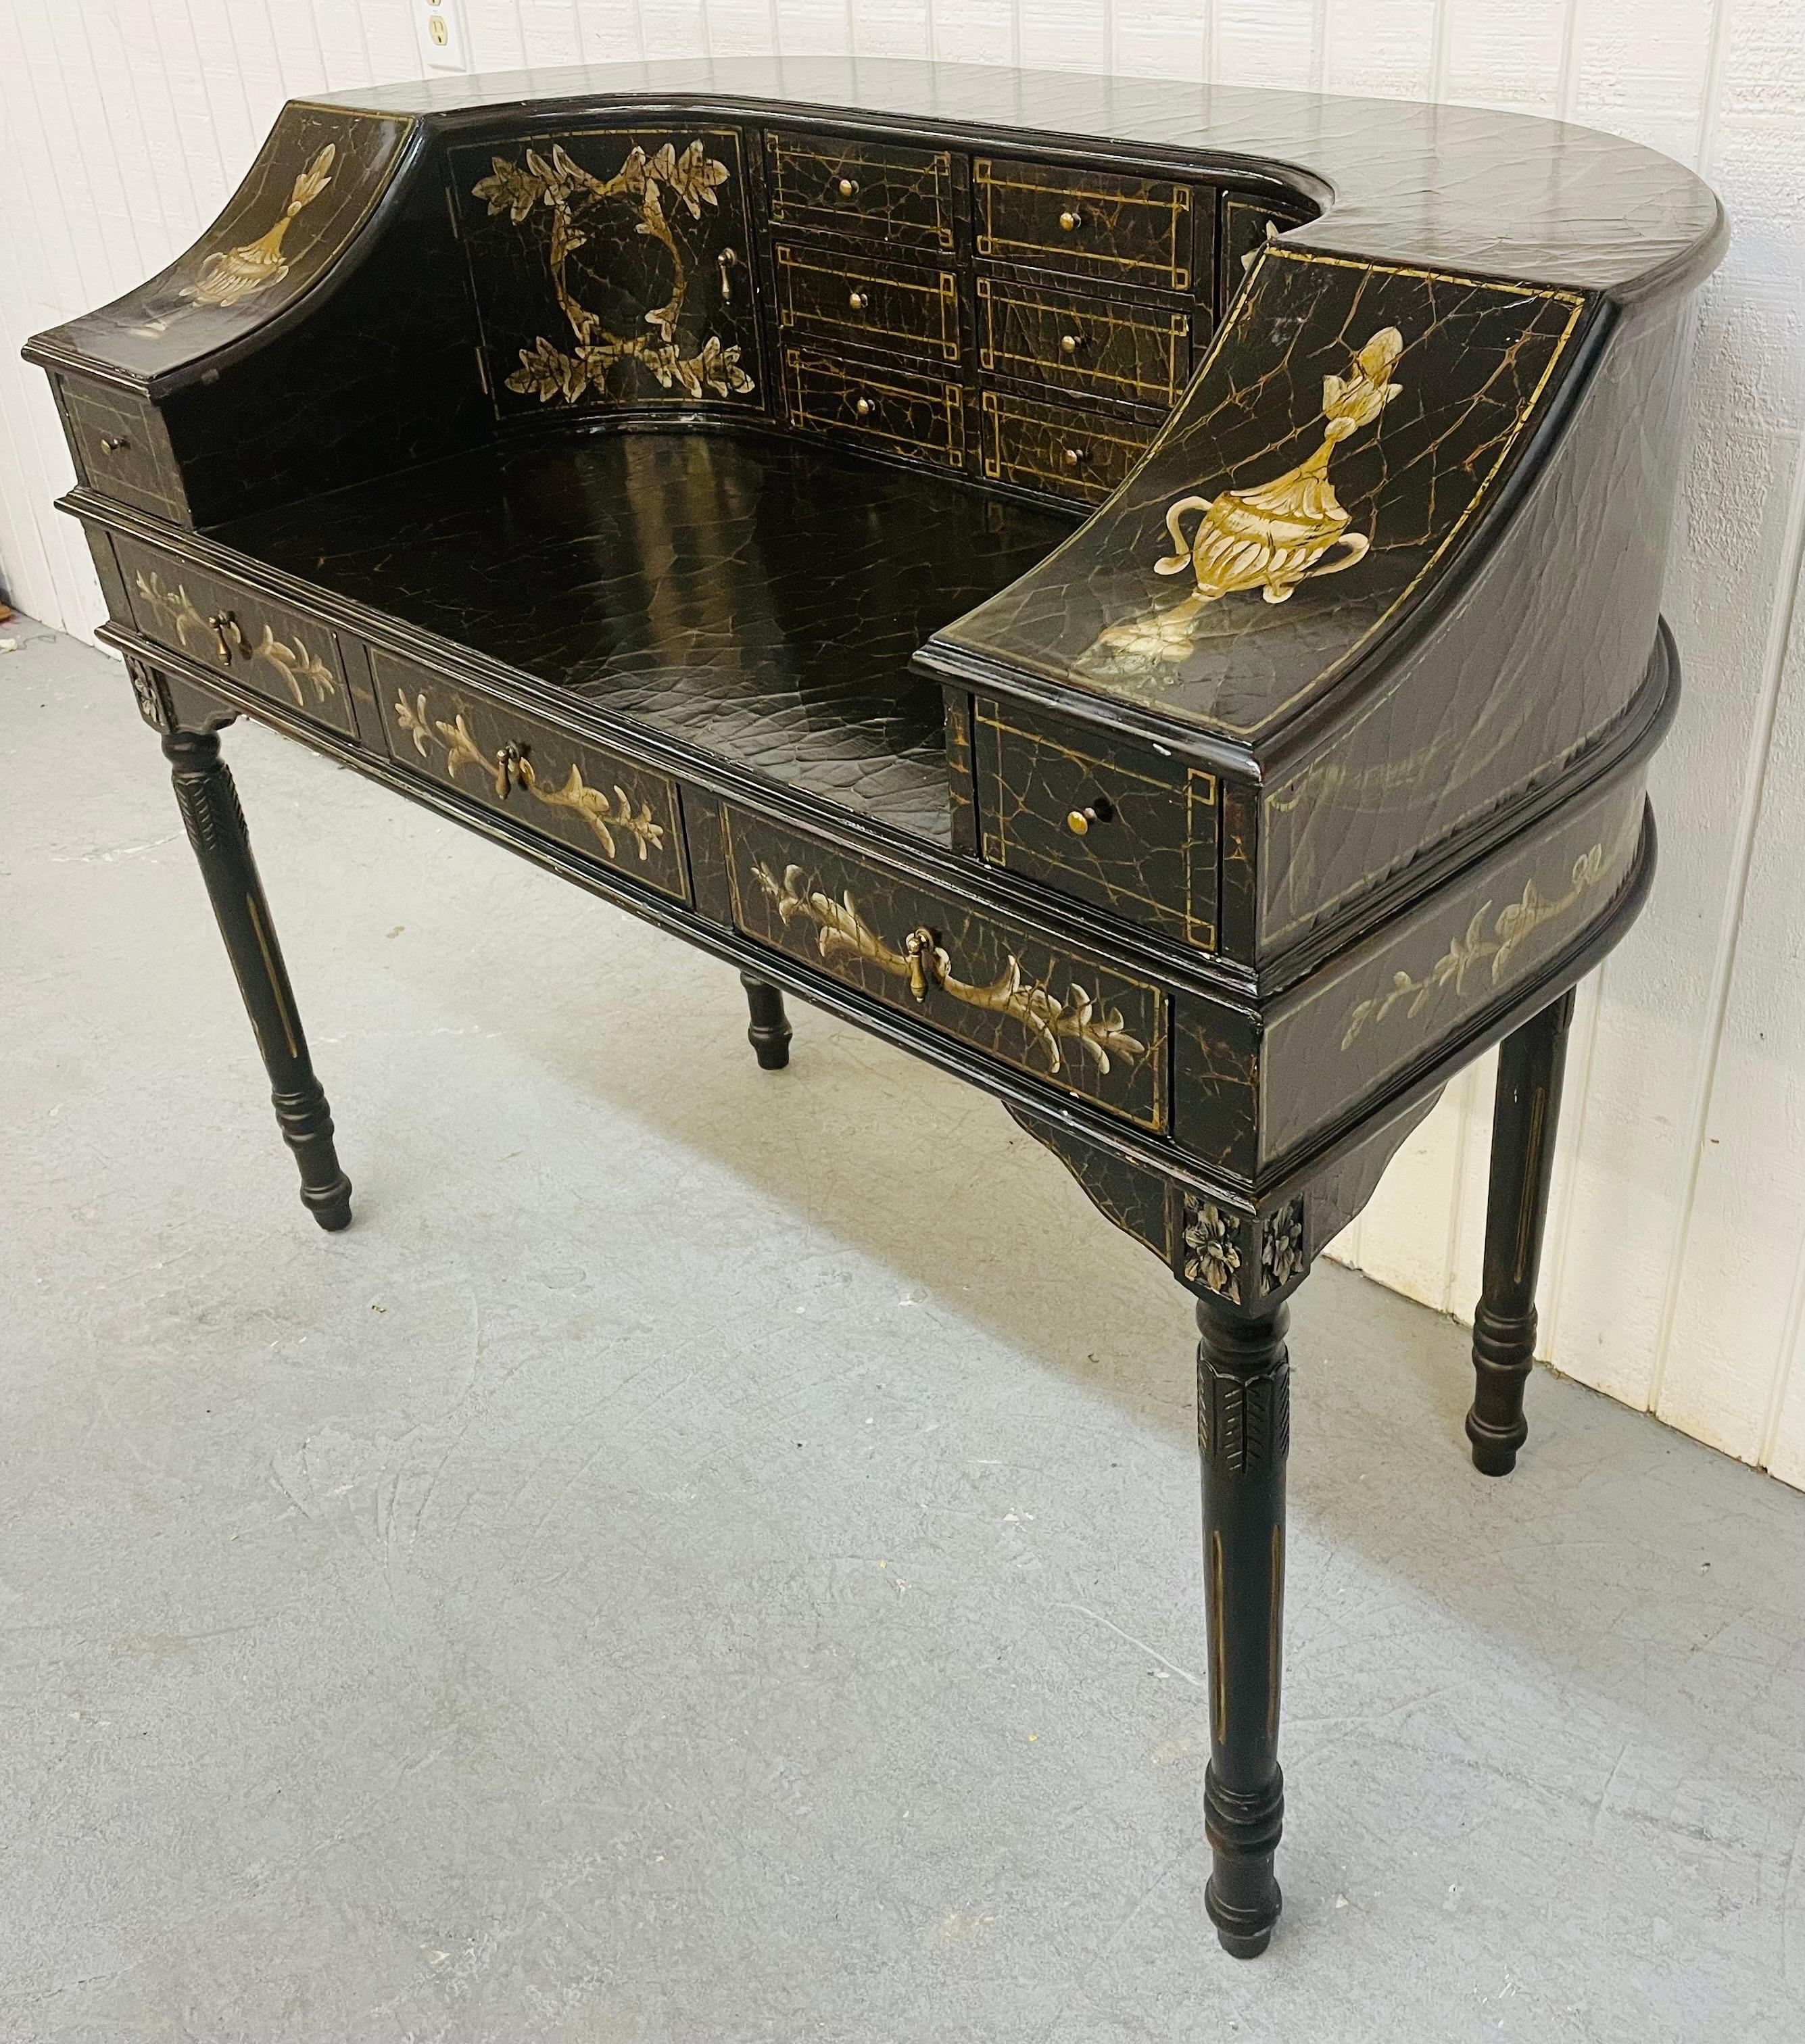 This listing is for a Modern Maitland Smith Style Carlton Desk. Featuring eleven drawers for storage, two doors that open up for more storage, original hardware, faux paint decorated design, a French style leg, and a black rustic finish.